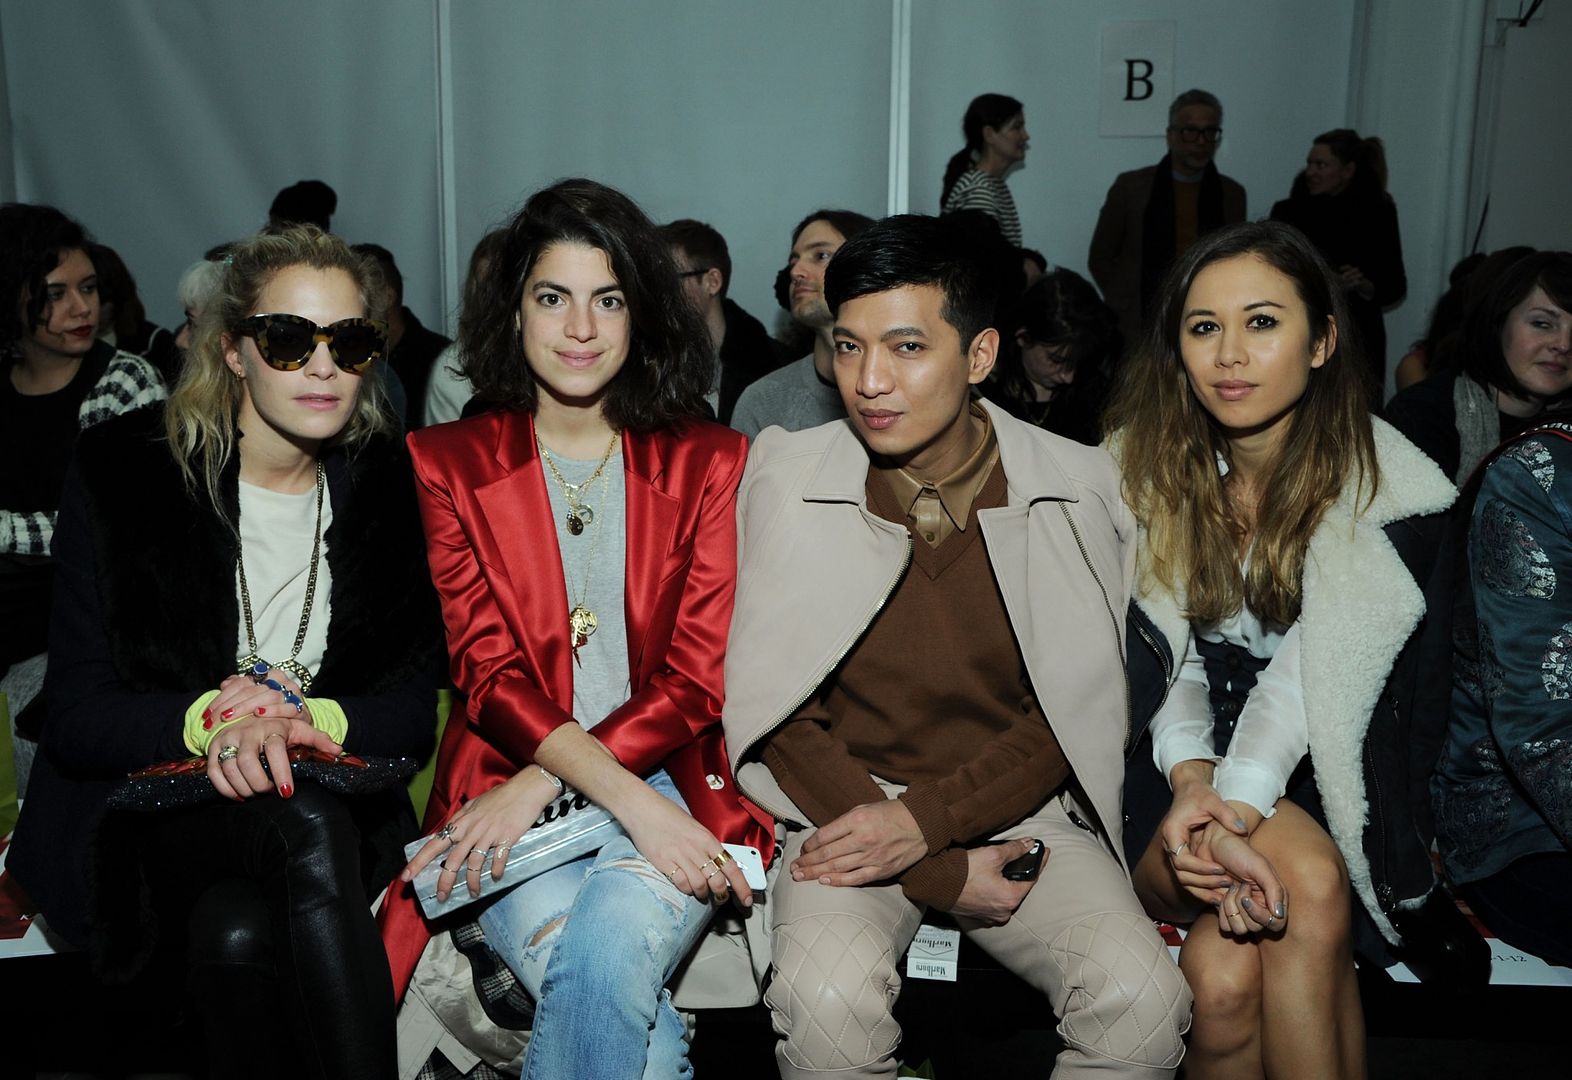 Throwback Thursday: Front Row At Fashion Week - ChiCityFashion